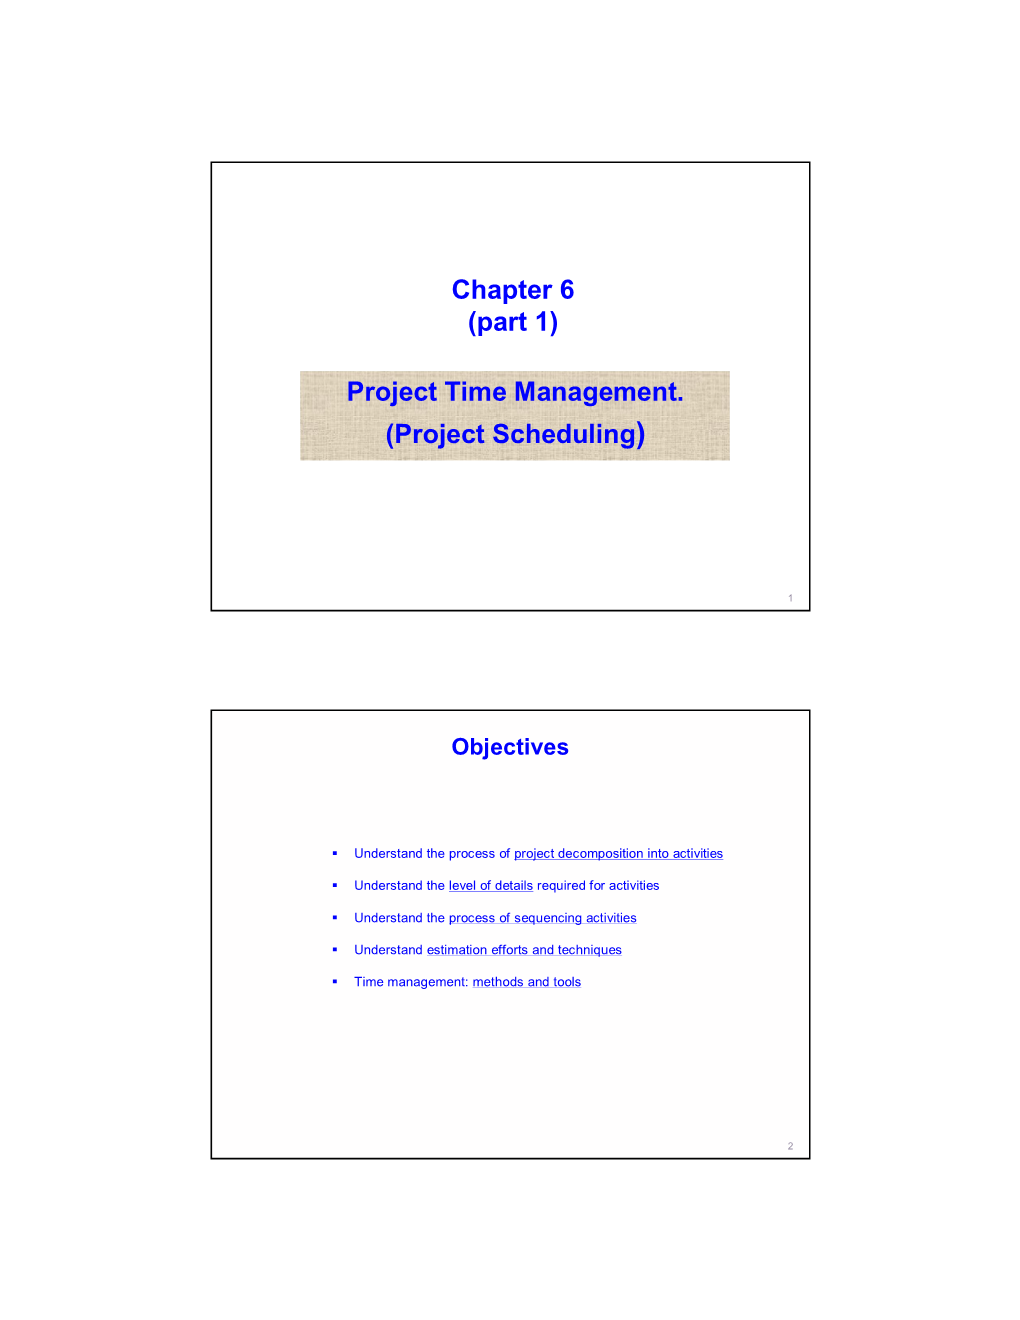 Chapter 6 (Part 1) Project Time Management. (Project Scheduling)